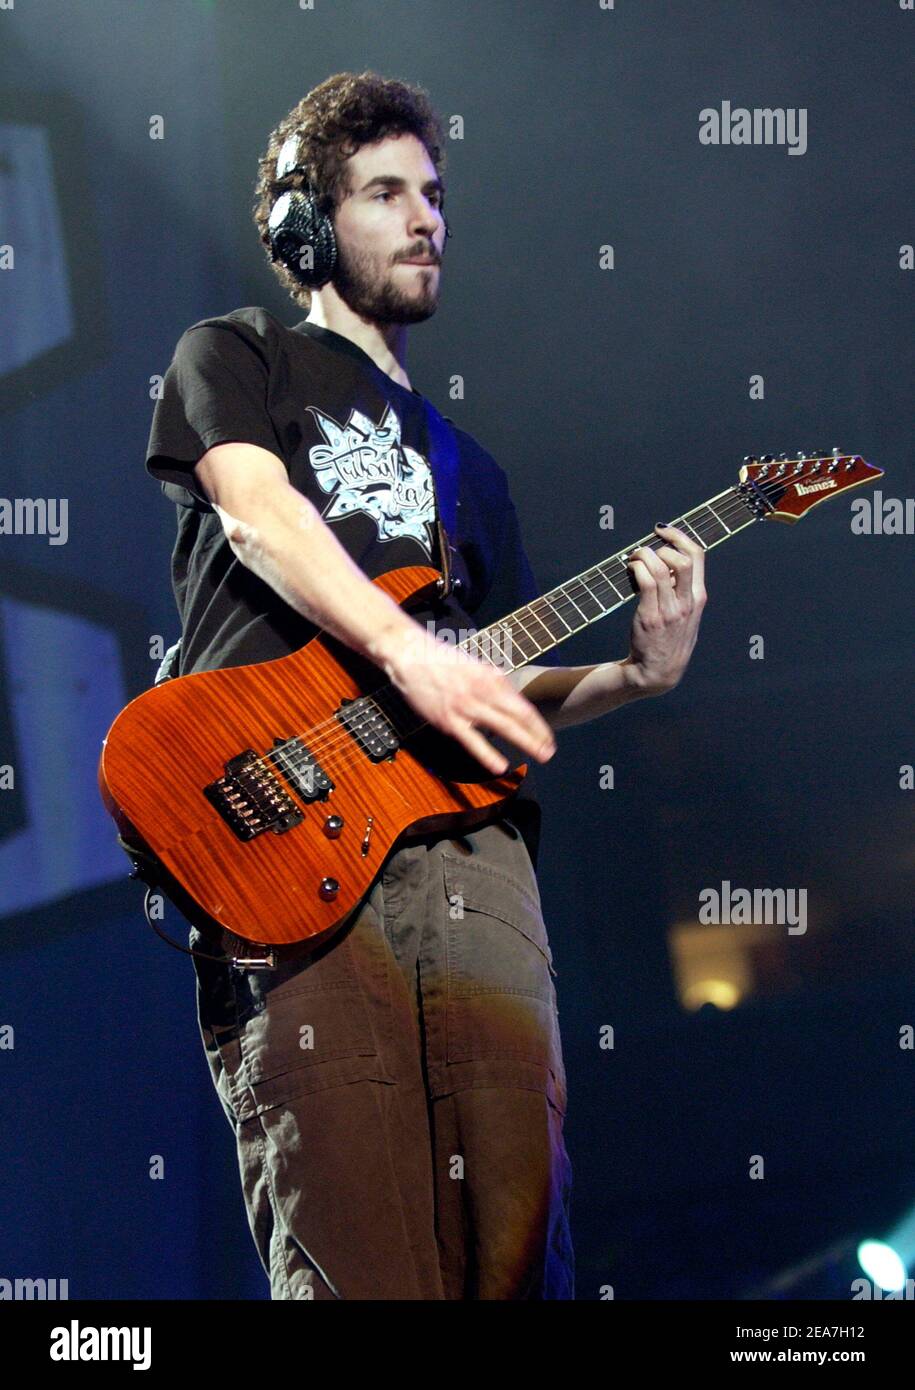 © Tim Mosenfelder/ABACA. 56163-4. San Jose-CA-USA, February 16, 2004. Brad Delson of Linkin Park performing part of the bands' Meteora Worldwide Tour 2004 Event held at the HP Pavilion in San Jose CA on February 16, 2004. Stock Photo